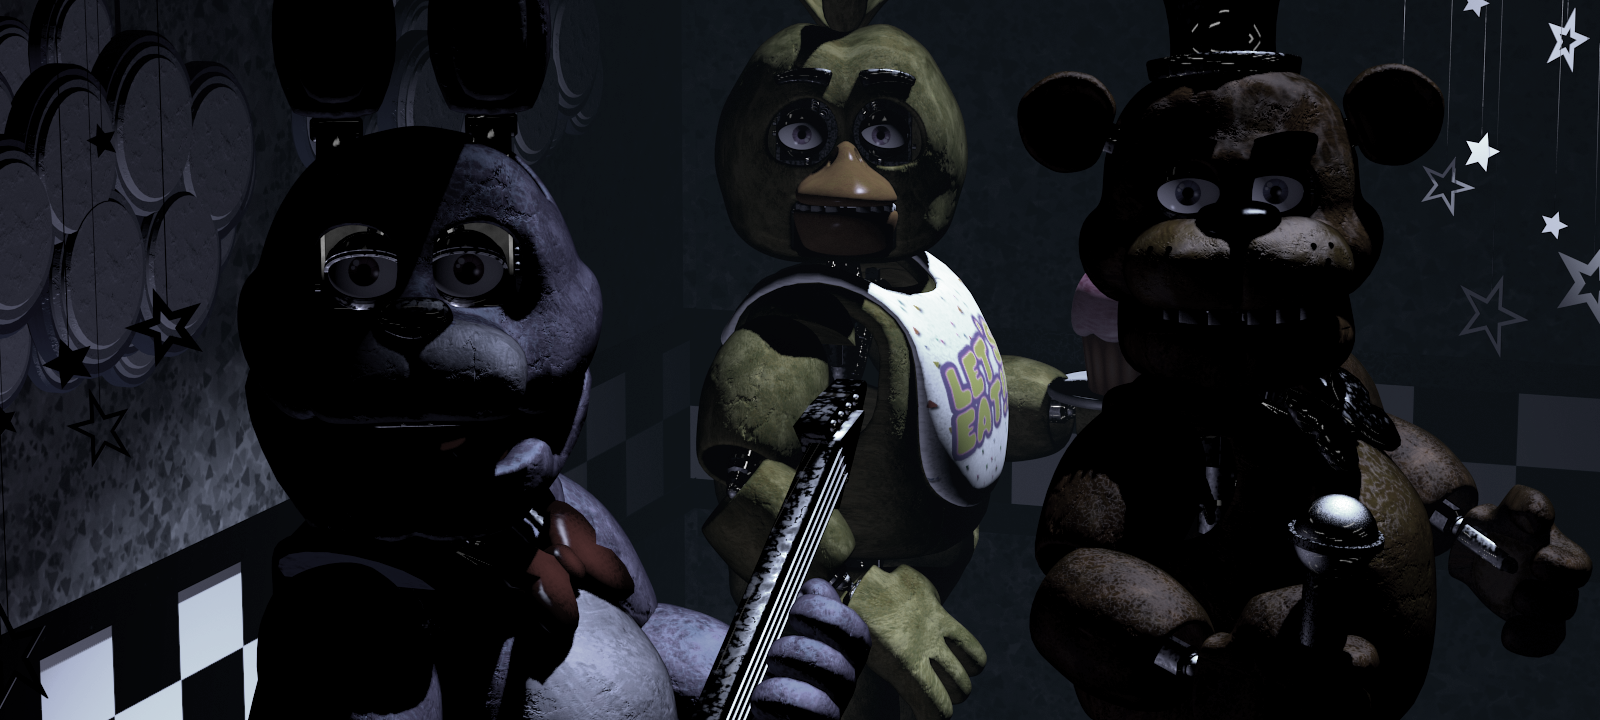 image-2-png-five-nights-at-freddy-s-wiki-wikia